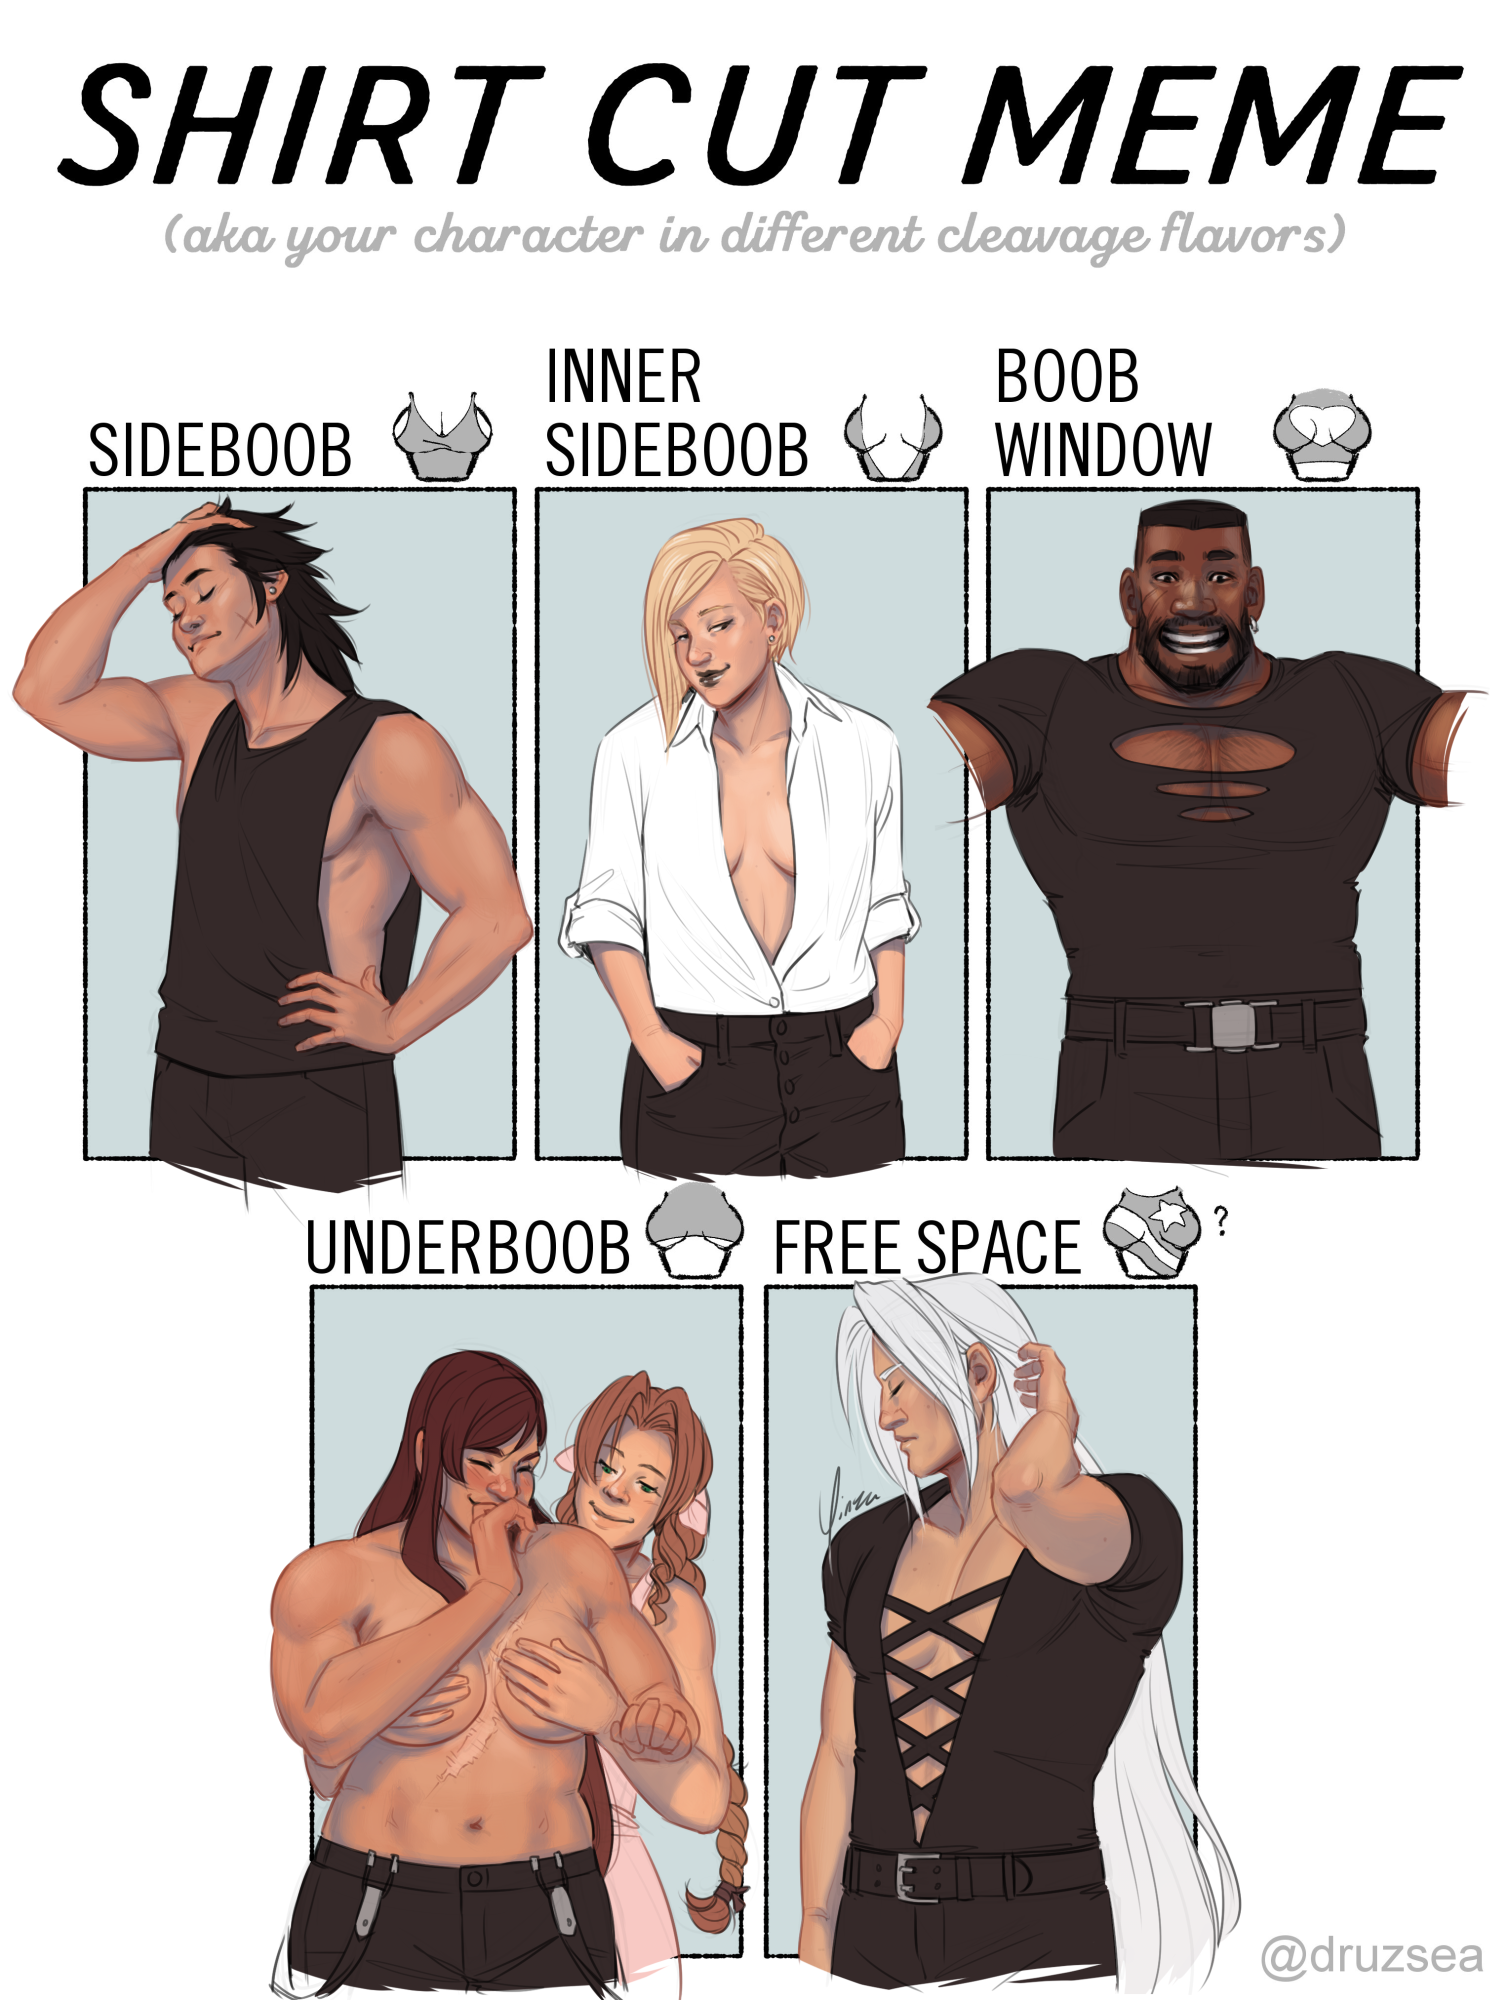 The shirt cut meme, featuring various Final Fantasy VII characters. Sideboob: Zack in a very loose tank top. He stands with his left hand on his hip and his right hand pushing his hair back, and he is smiling with his eyes closed. Inner sideboob: Elena in an open white button-down shirt and black pants. She stands with her hands in her pockets and is smirking as she looks to the side. Boob window: Barret in a tight black T-shirt with three oval holes across the chest. He is grinning and has his arms spread wide as if inviting a hug. Underboob: Aeris stands behind Tifa with her hands on her boobs and a smile on her face. Tifa is otherwise shirtless but wears black shorts and loose suspenders. She is laughing with one hand to her mouth. Her scar is visible diagonally across her chest. Free space: Sephiroth in a black T-shirt with a deep V neck criss-crossed by a series of straps. He has his left hand raised to push his hair back, and his head is turned to the side, his eyes closed.